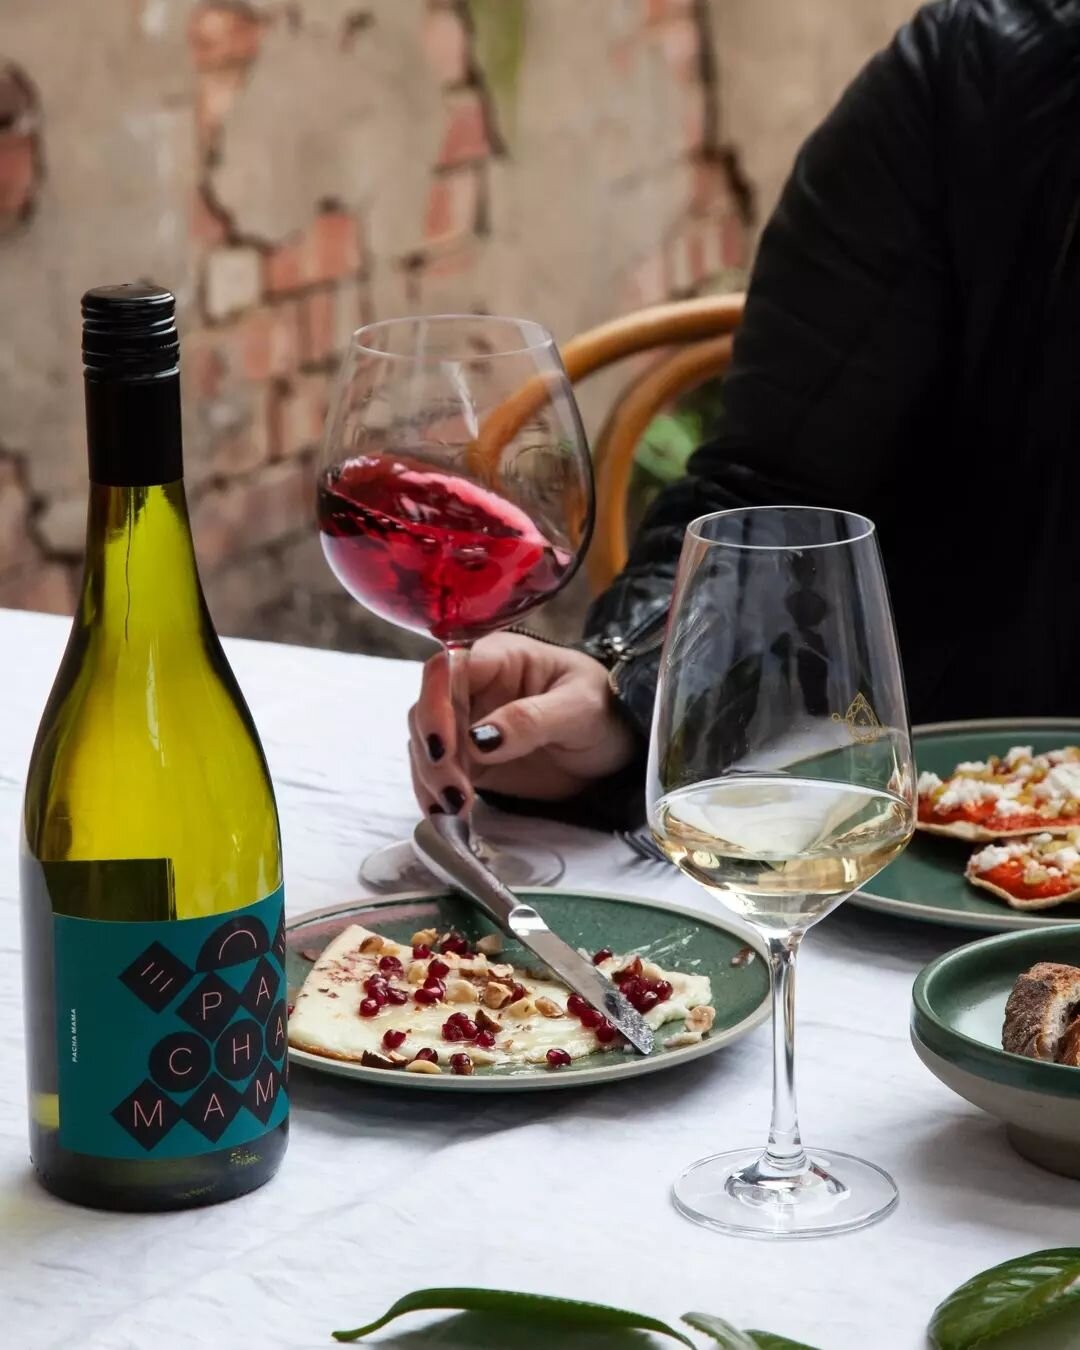 Not sure what to drink? It's a hard choice sometimes so why not open a couple of bottles!

Our Pacha Mama Pinot Noir is full of bright red cherries, wild strawberries, and beautifully perfumed and pairs with a range wide of dishes.&nbsp;

Pacha Mama 